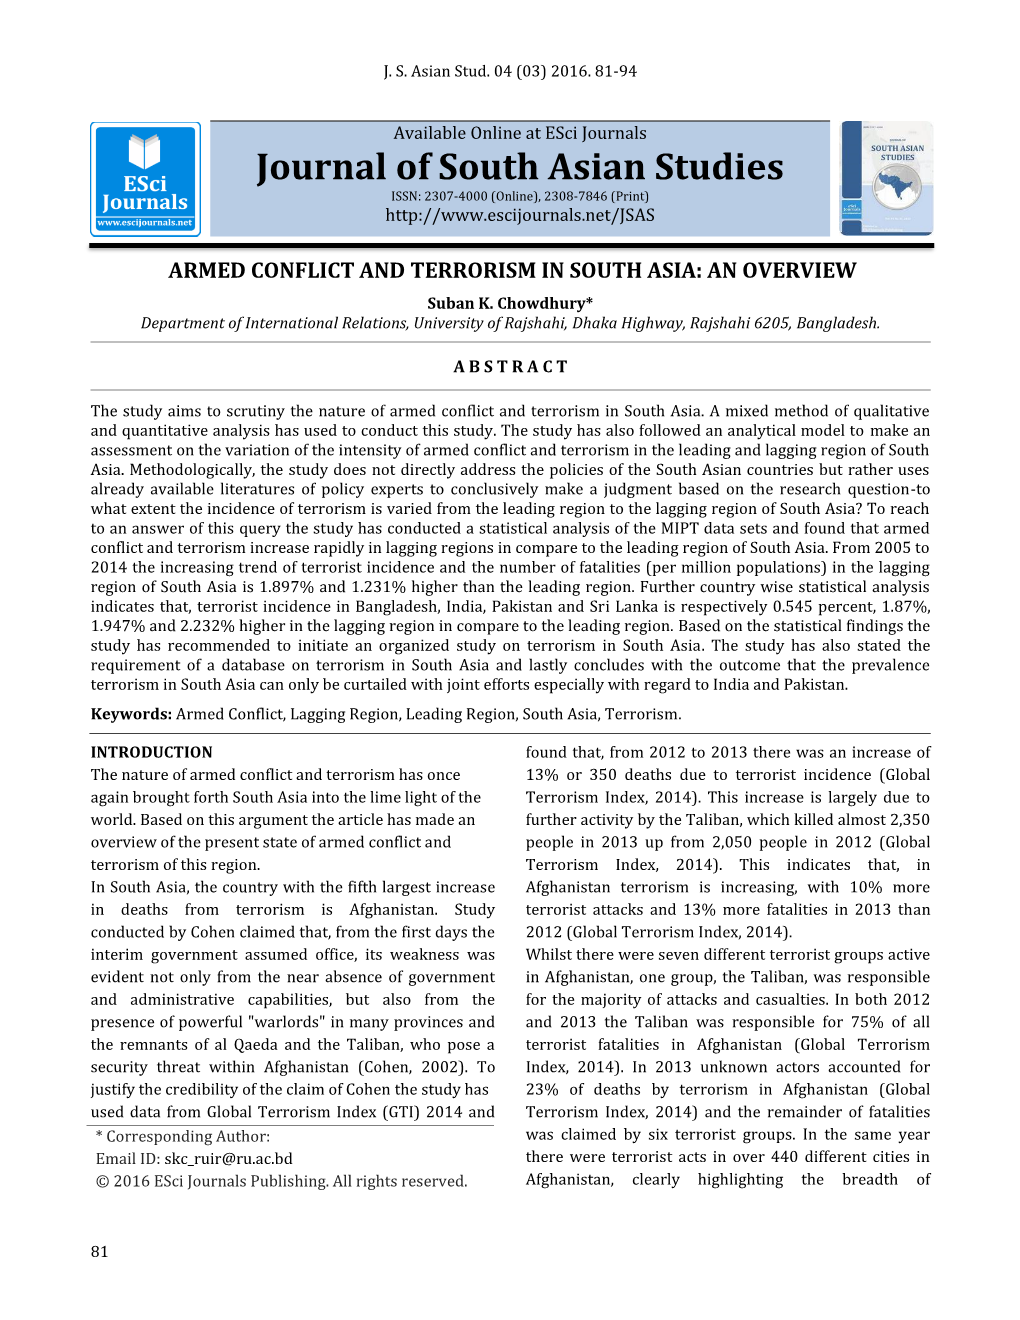 ARMED CONFLICT and TERRORISM in SOUTH ASIA: an OVERVIEW Suban K